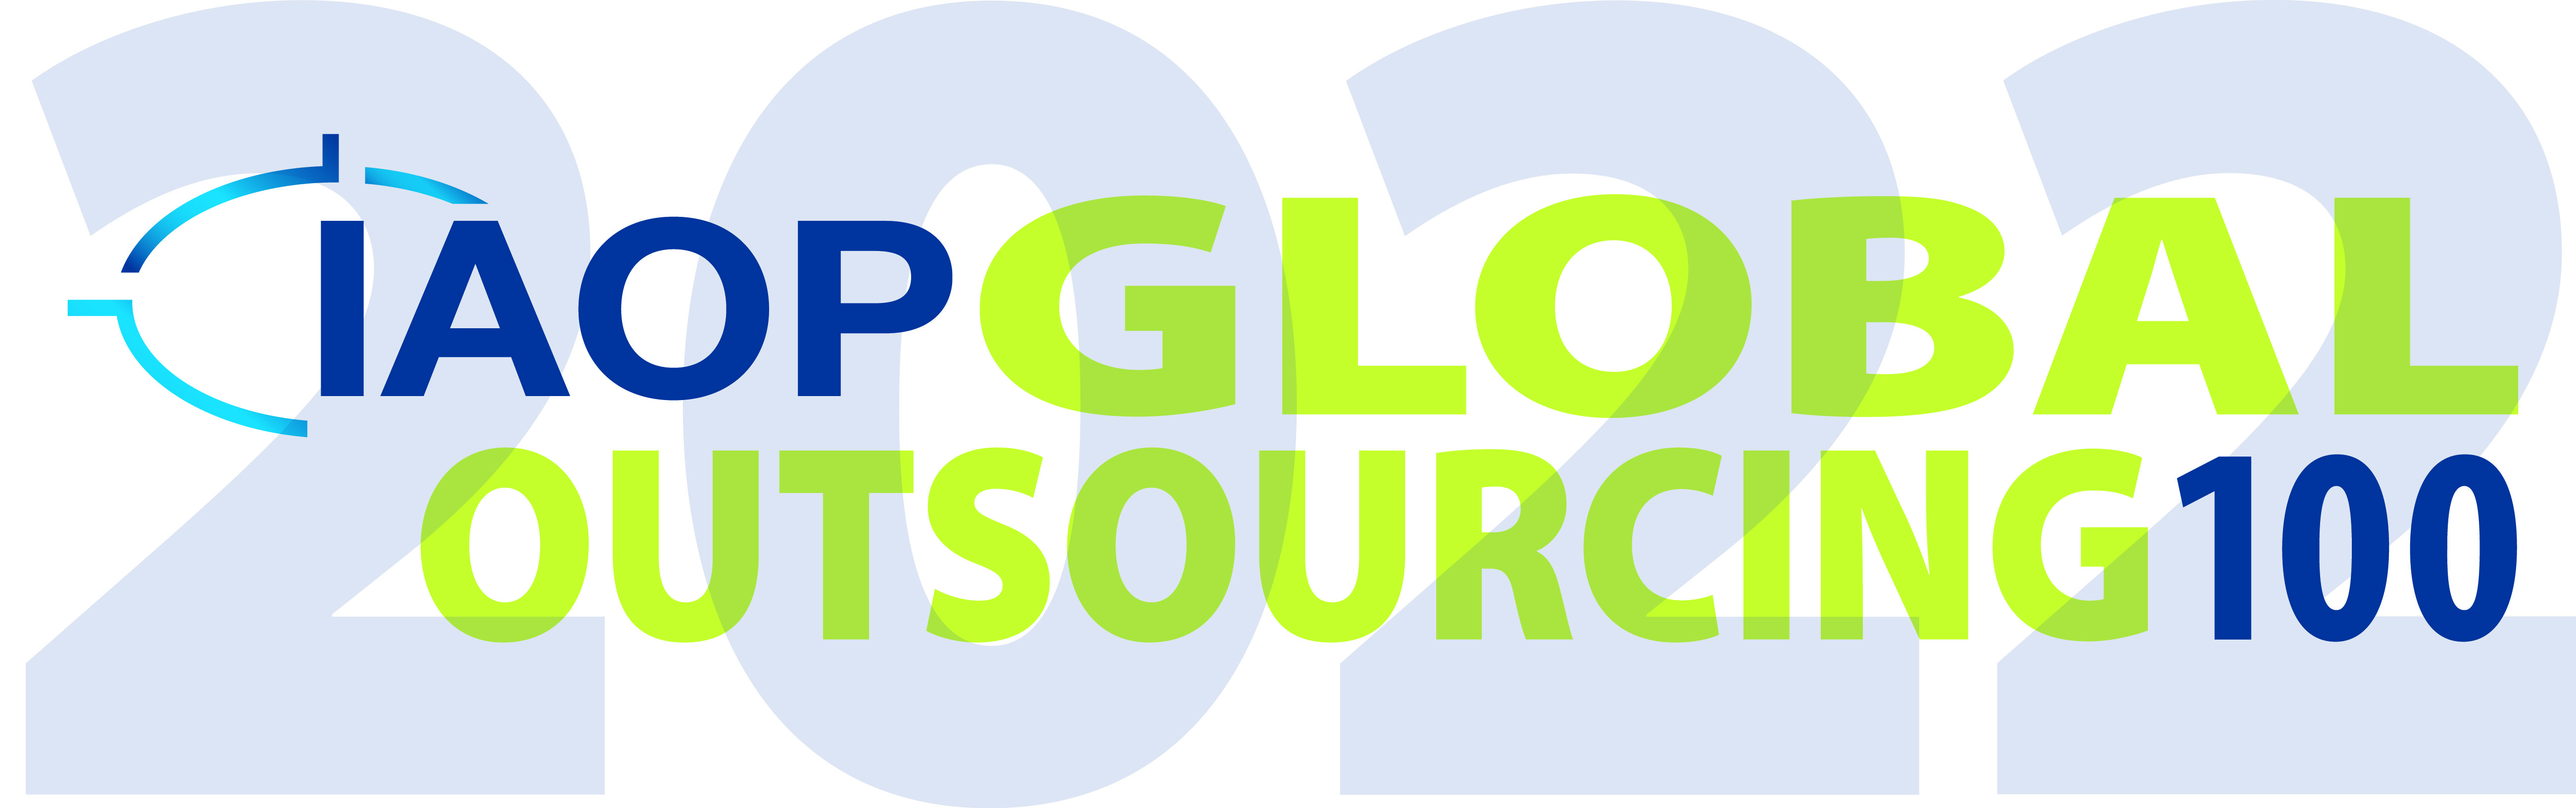 Qualfon Receives Leadership Recognition on IAOP’s 2022 Global Outsourcing 100 List